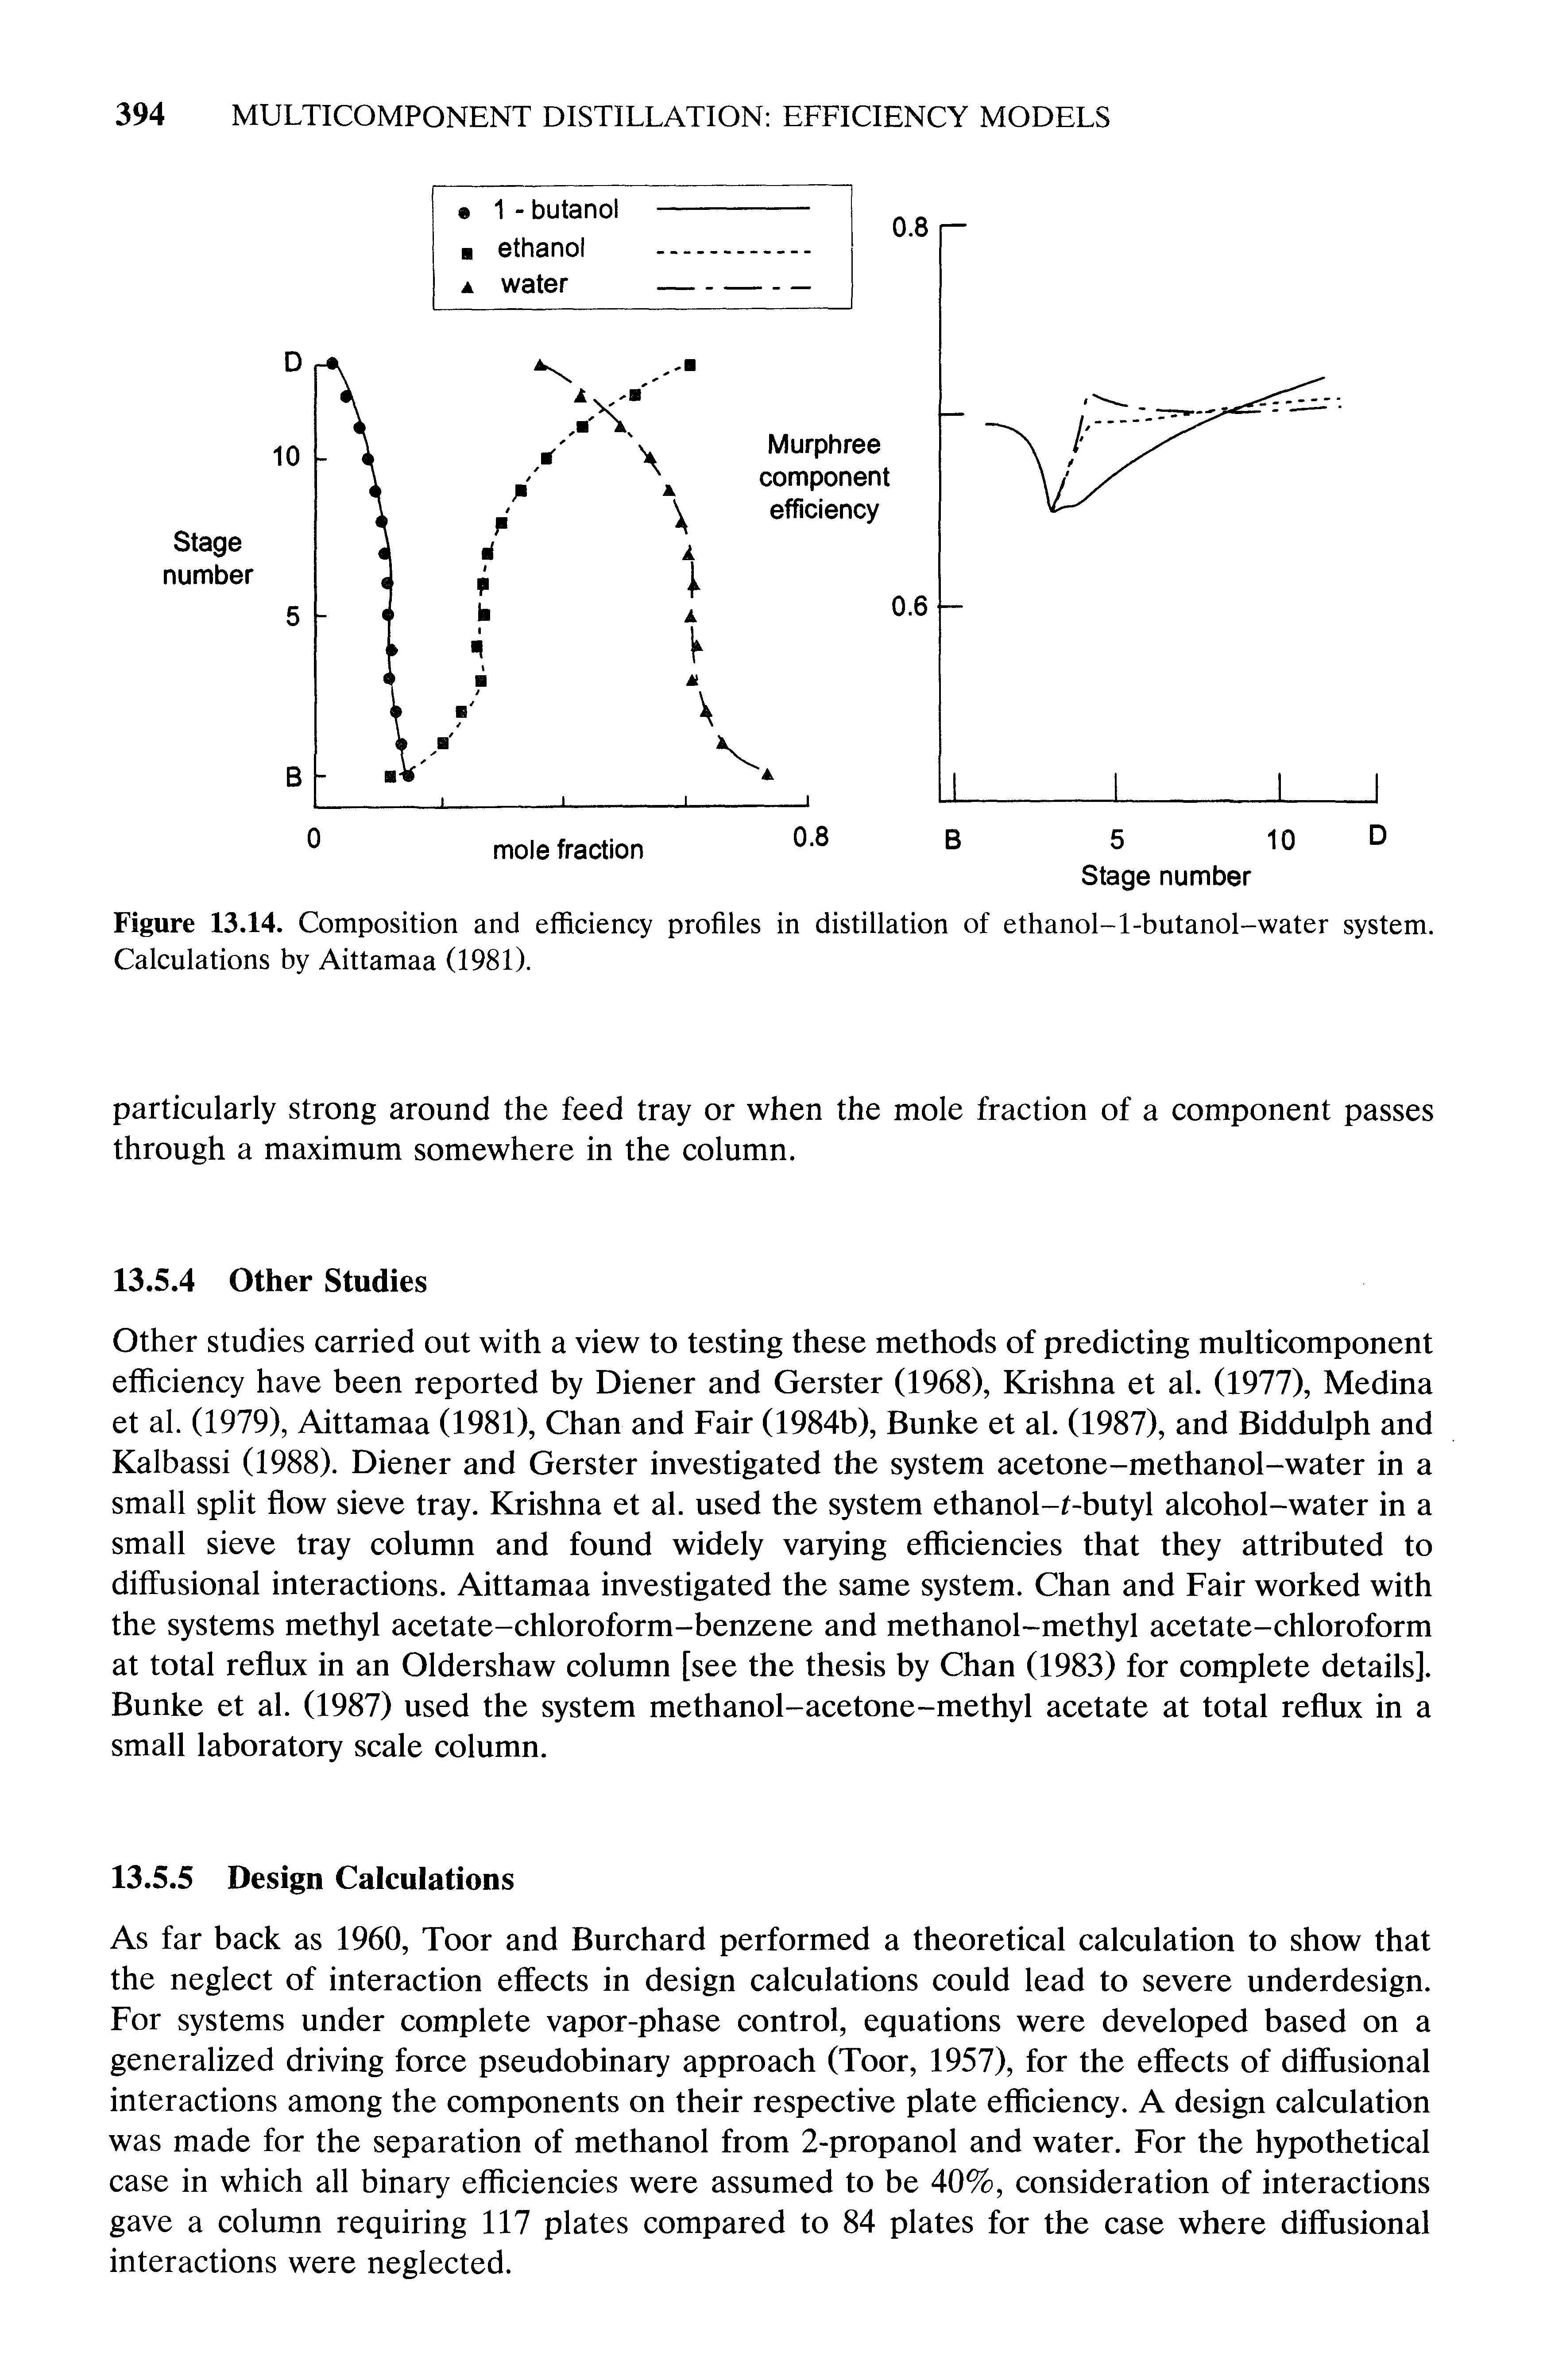 Figure 13.14. Composition and efficiency profiles in distillation of ethanol-l-butanol-water system. Calculations by Aittamaa (1981).